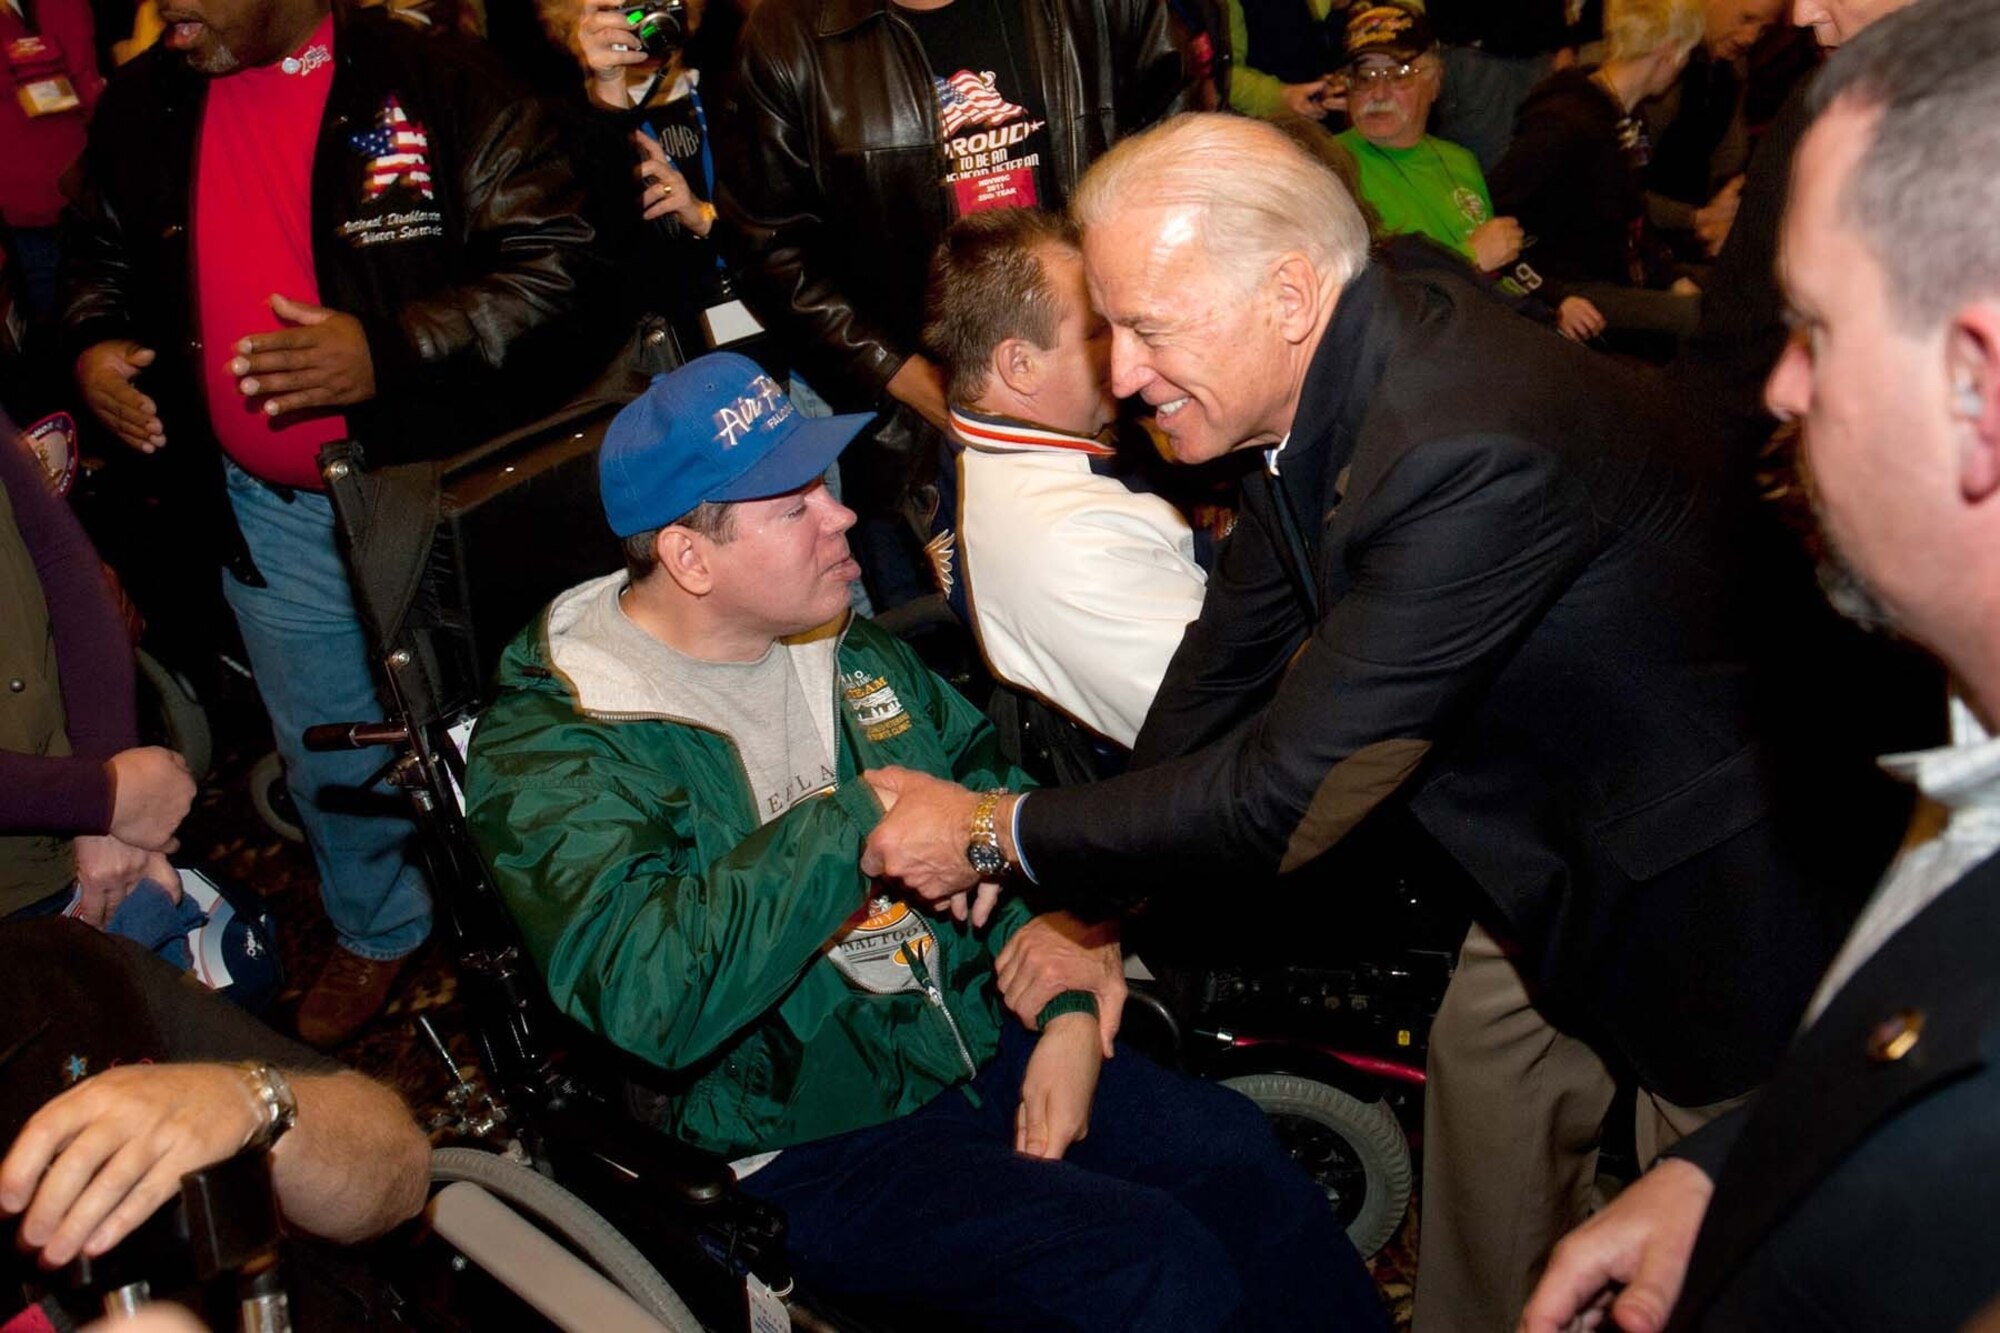 Vice President Joe Biden greets a participant at the opening ceremonies for the 25th National Disabled Veterans Winter Sports Clinic March 27, 2011, in Snowmass Village, Colo.  (VA photo/Robert Turtil)